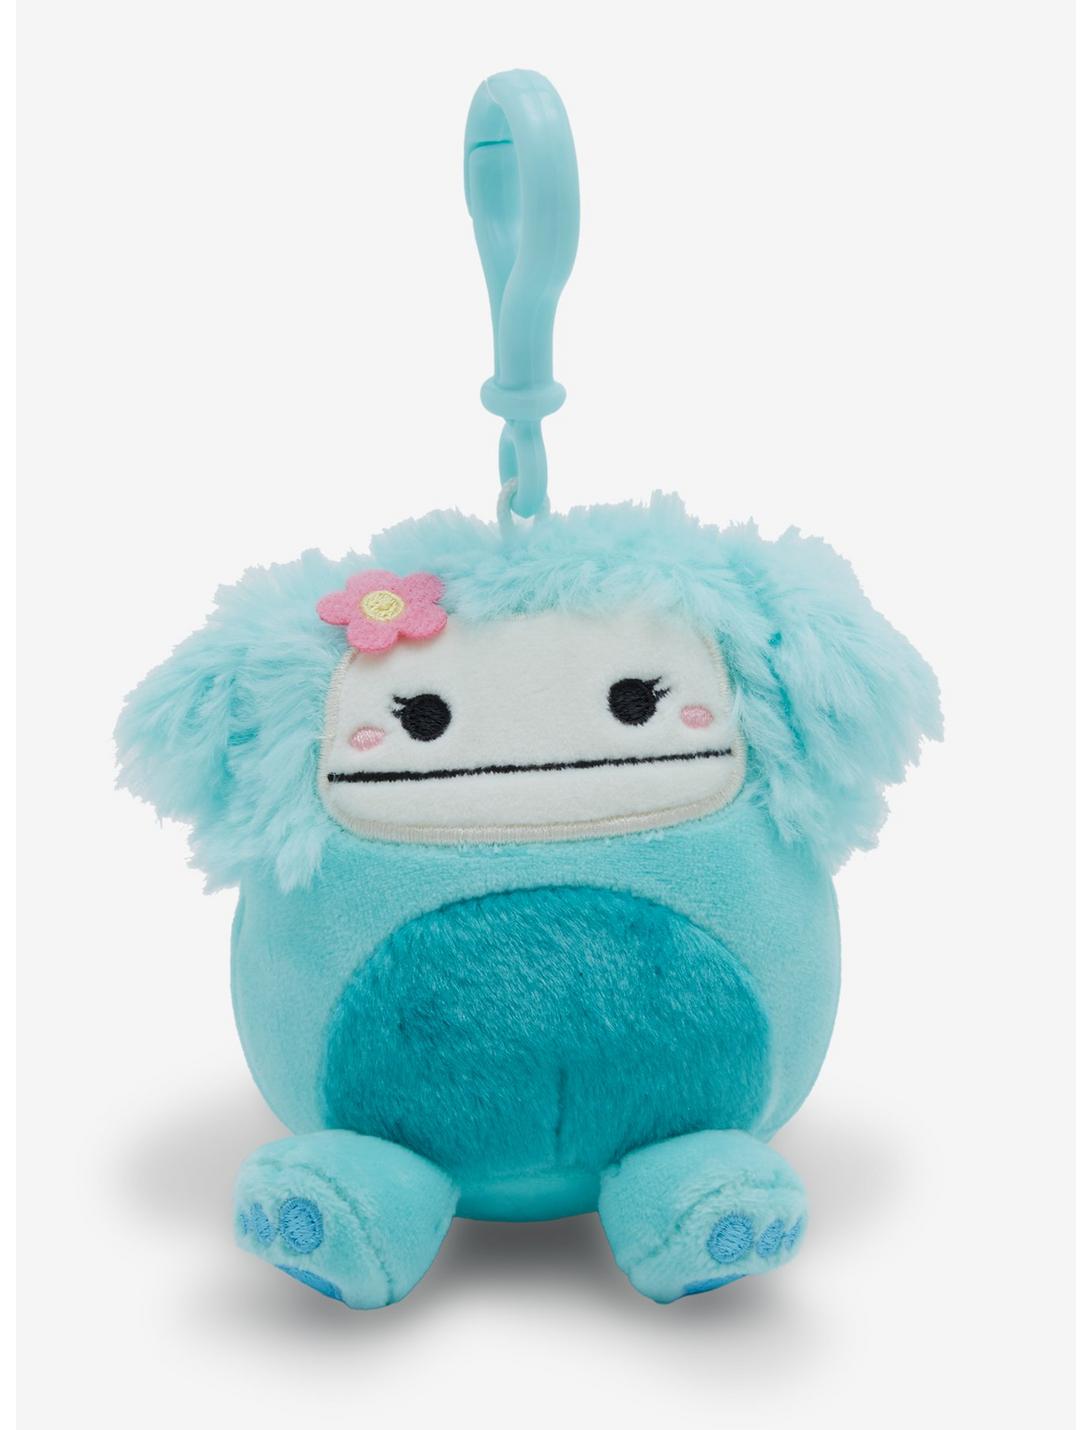 Squishmallows Joelle the Bigfoot 5 Inch Plush Keychain, , hi-res